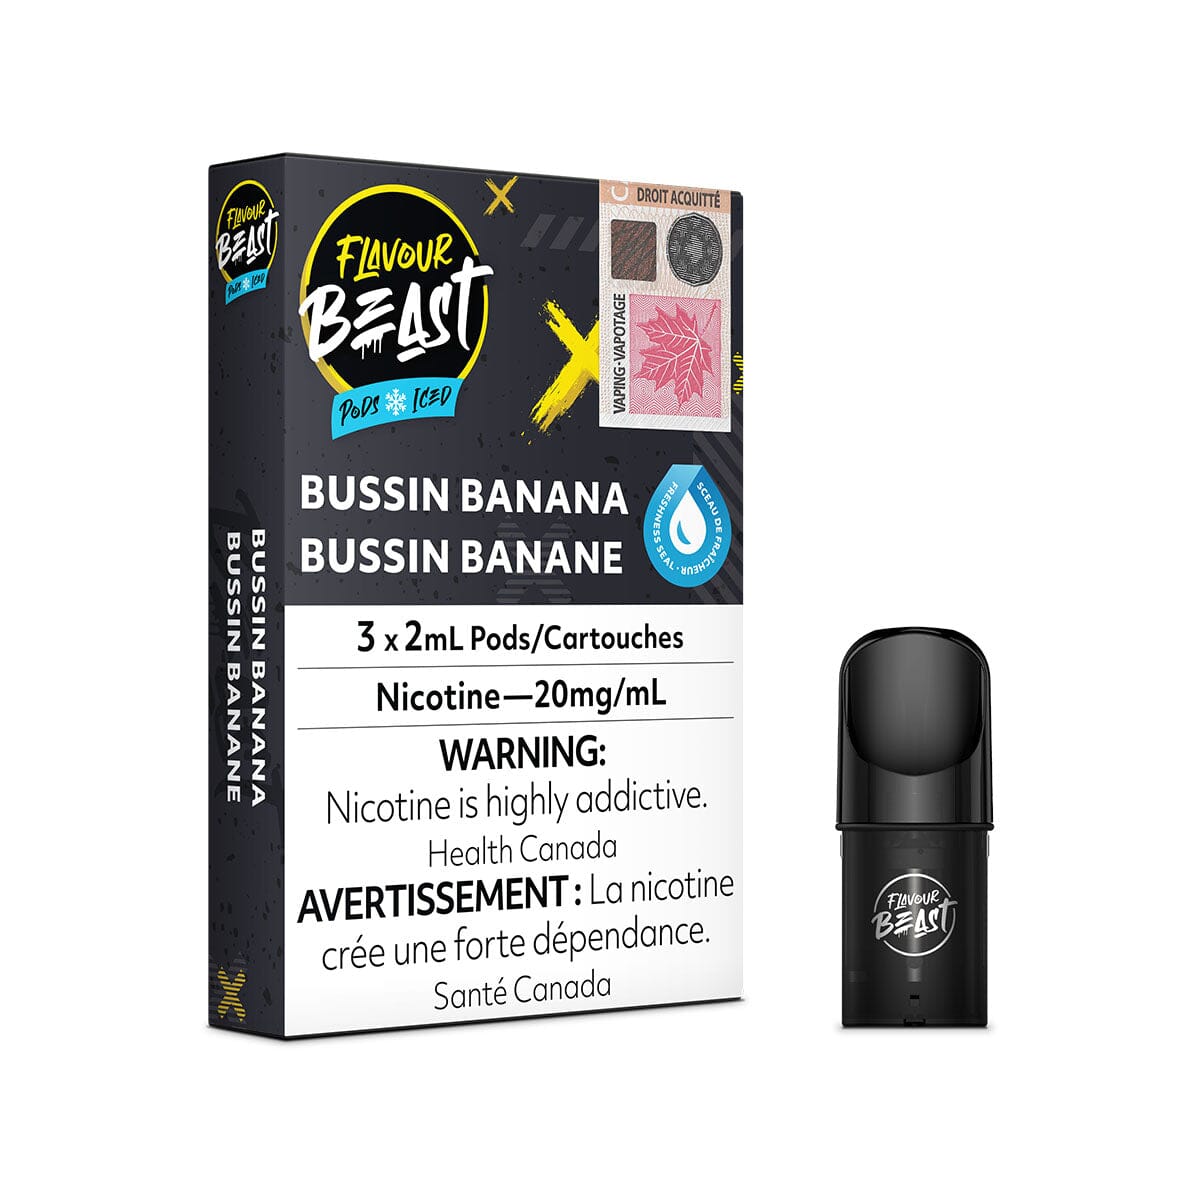 STLTH Compatible Flavour Beast Bussin Banana Iced Vape Pods Pre-filled Pod Flavour Beast 